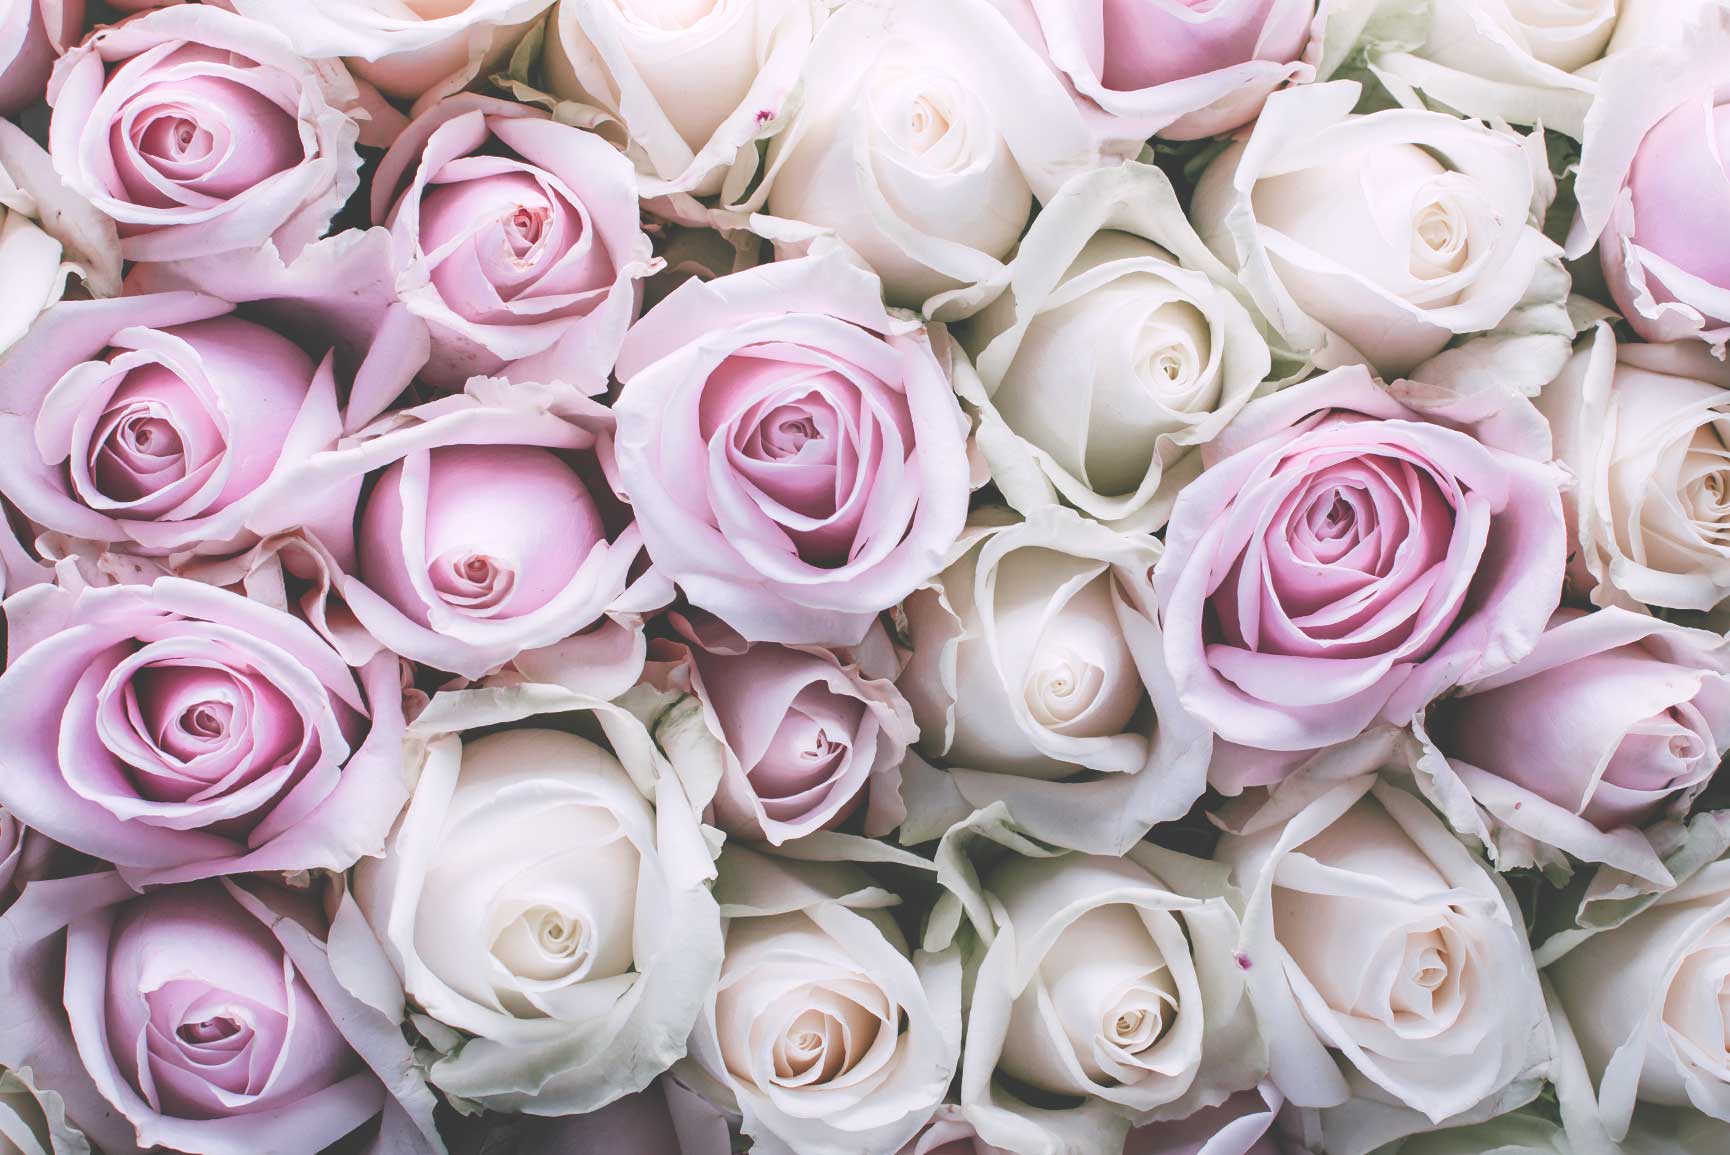 Vintage Floral Iphone Wallpaper Collection - Android Application Package , HD Wallpaper & Backgrounds